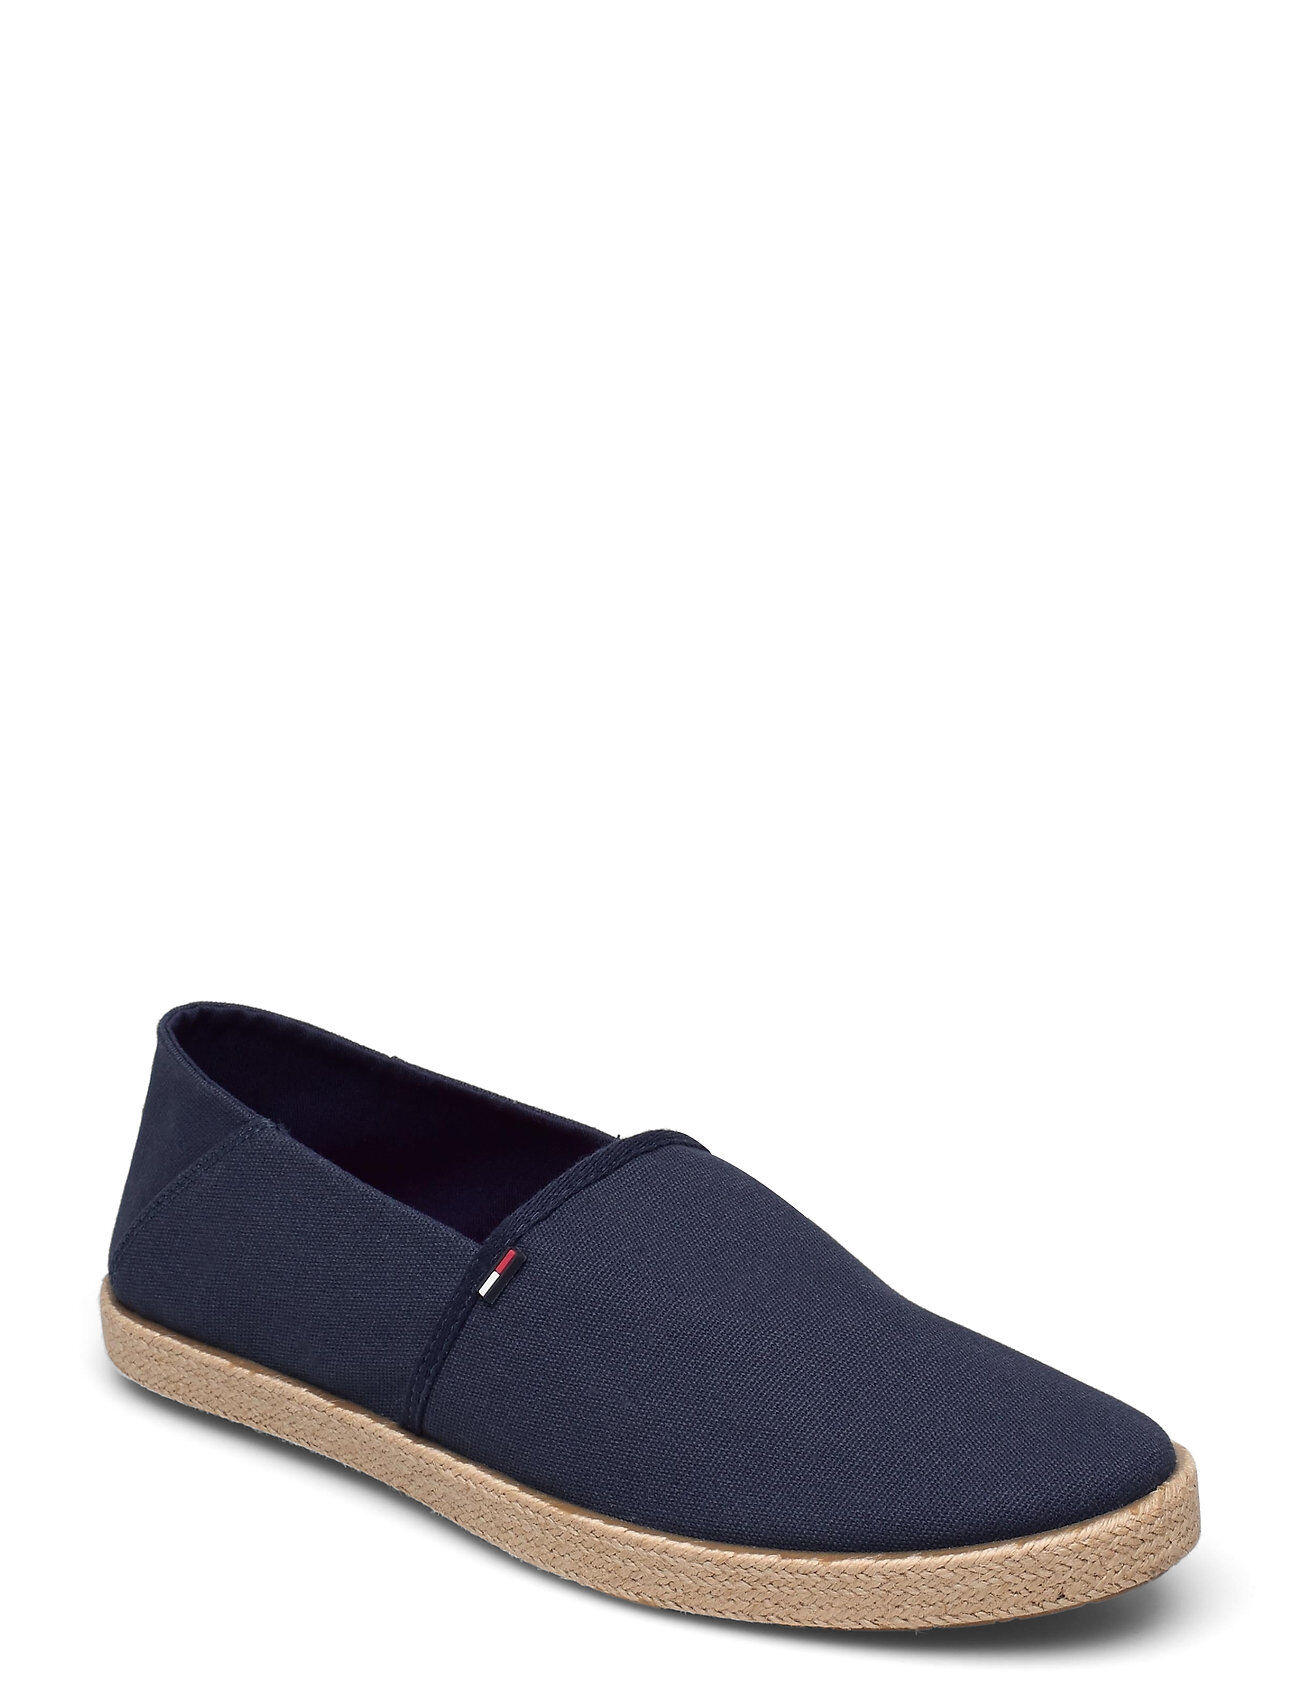 Tommy Hilfiger Tommy Jeans Essential Espadrille Espadriller Sko Blå Tommy Hilfiger